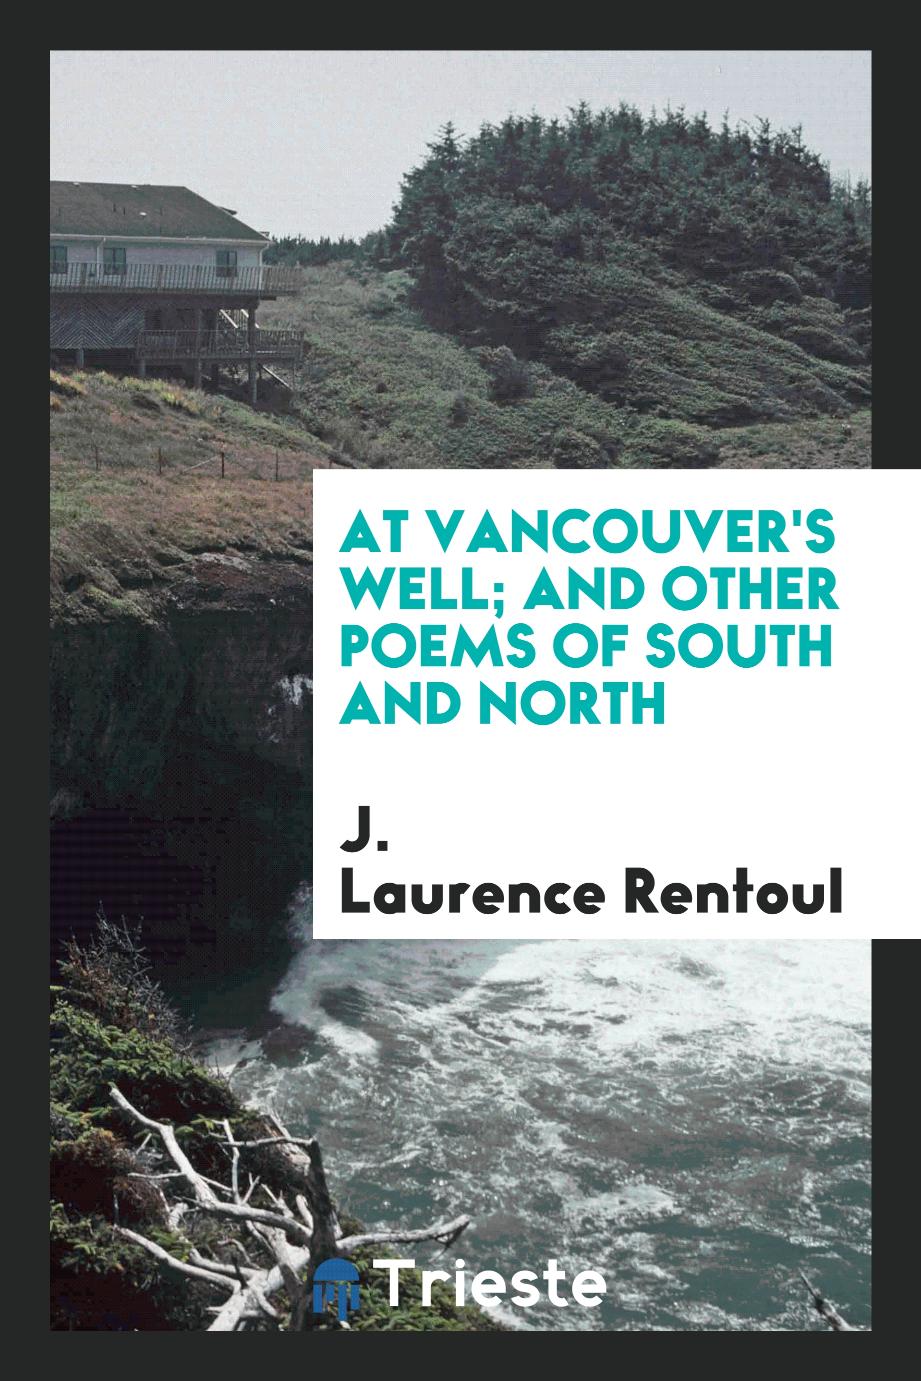 At Vancouver's well; and other poems of south and north